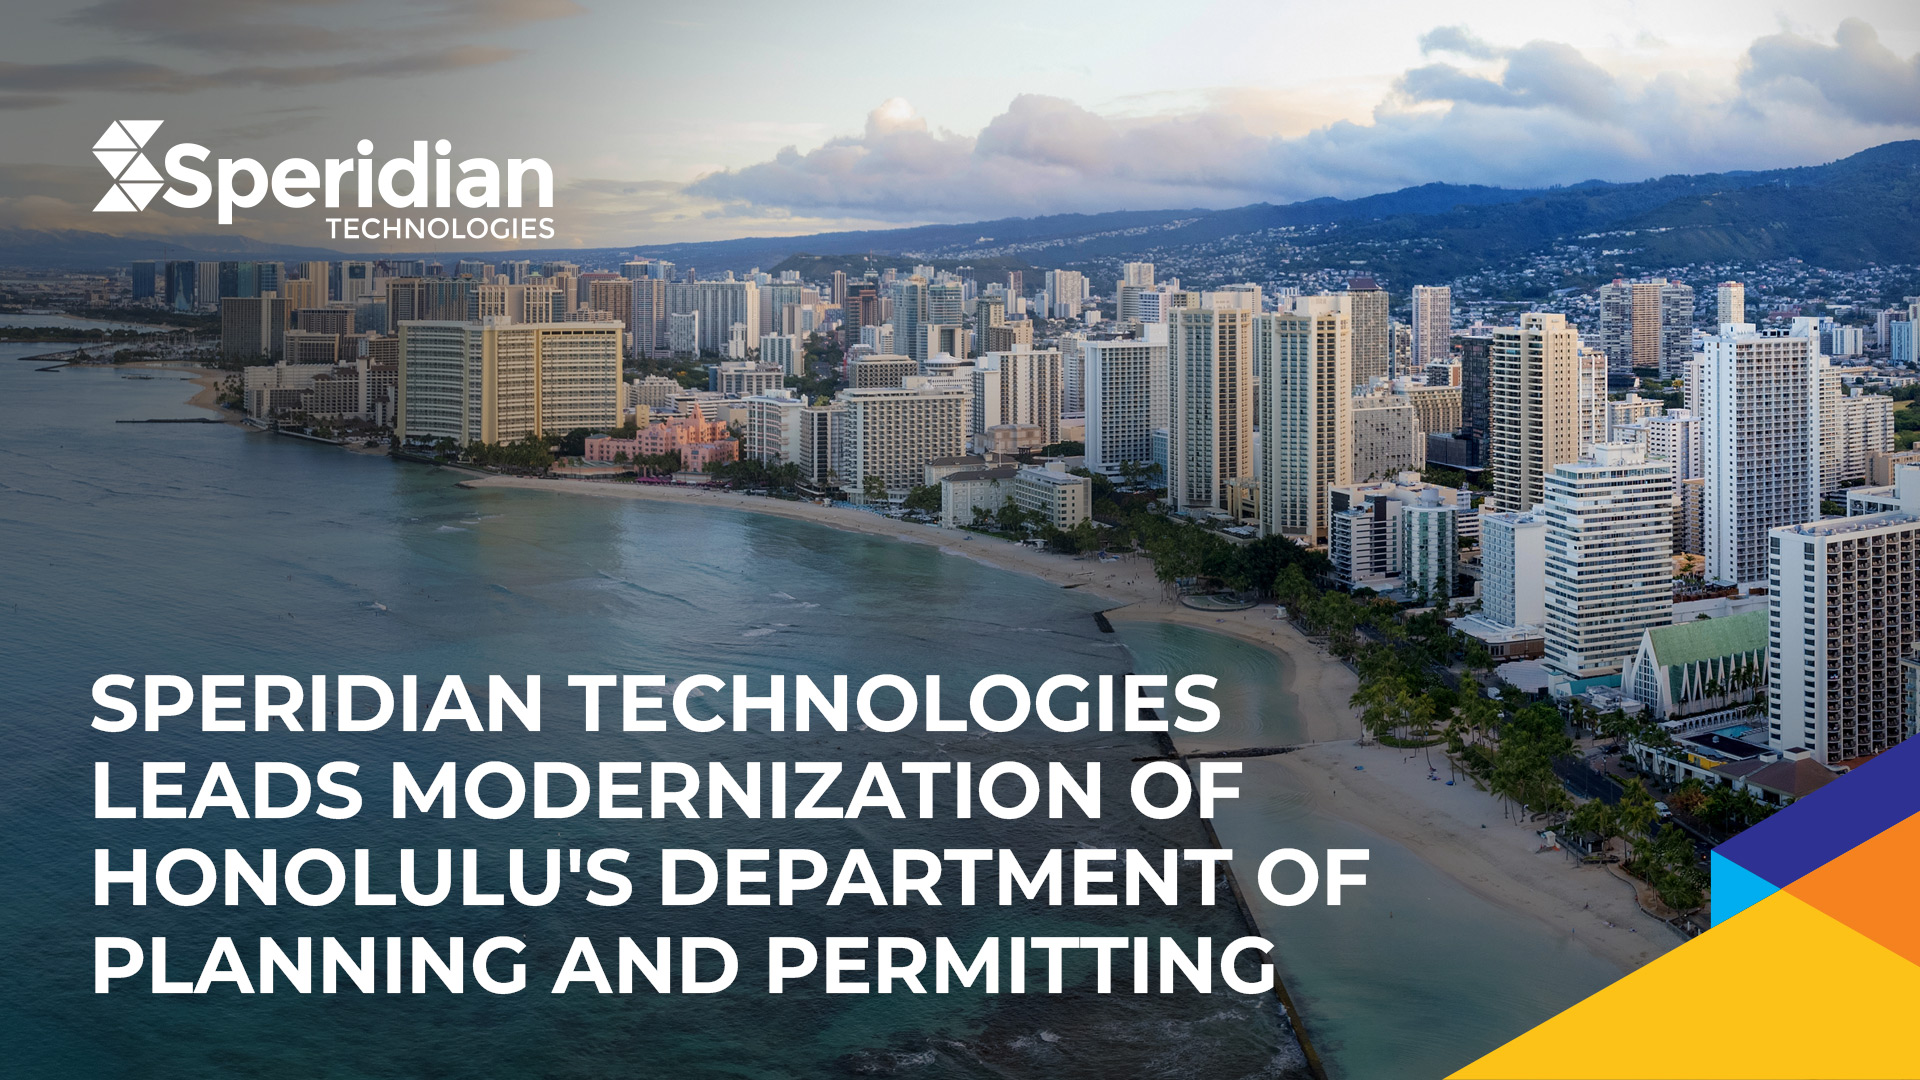 Speridian Technologies Leads Modernization of Honolulu’s Department of Planning and Permitting